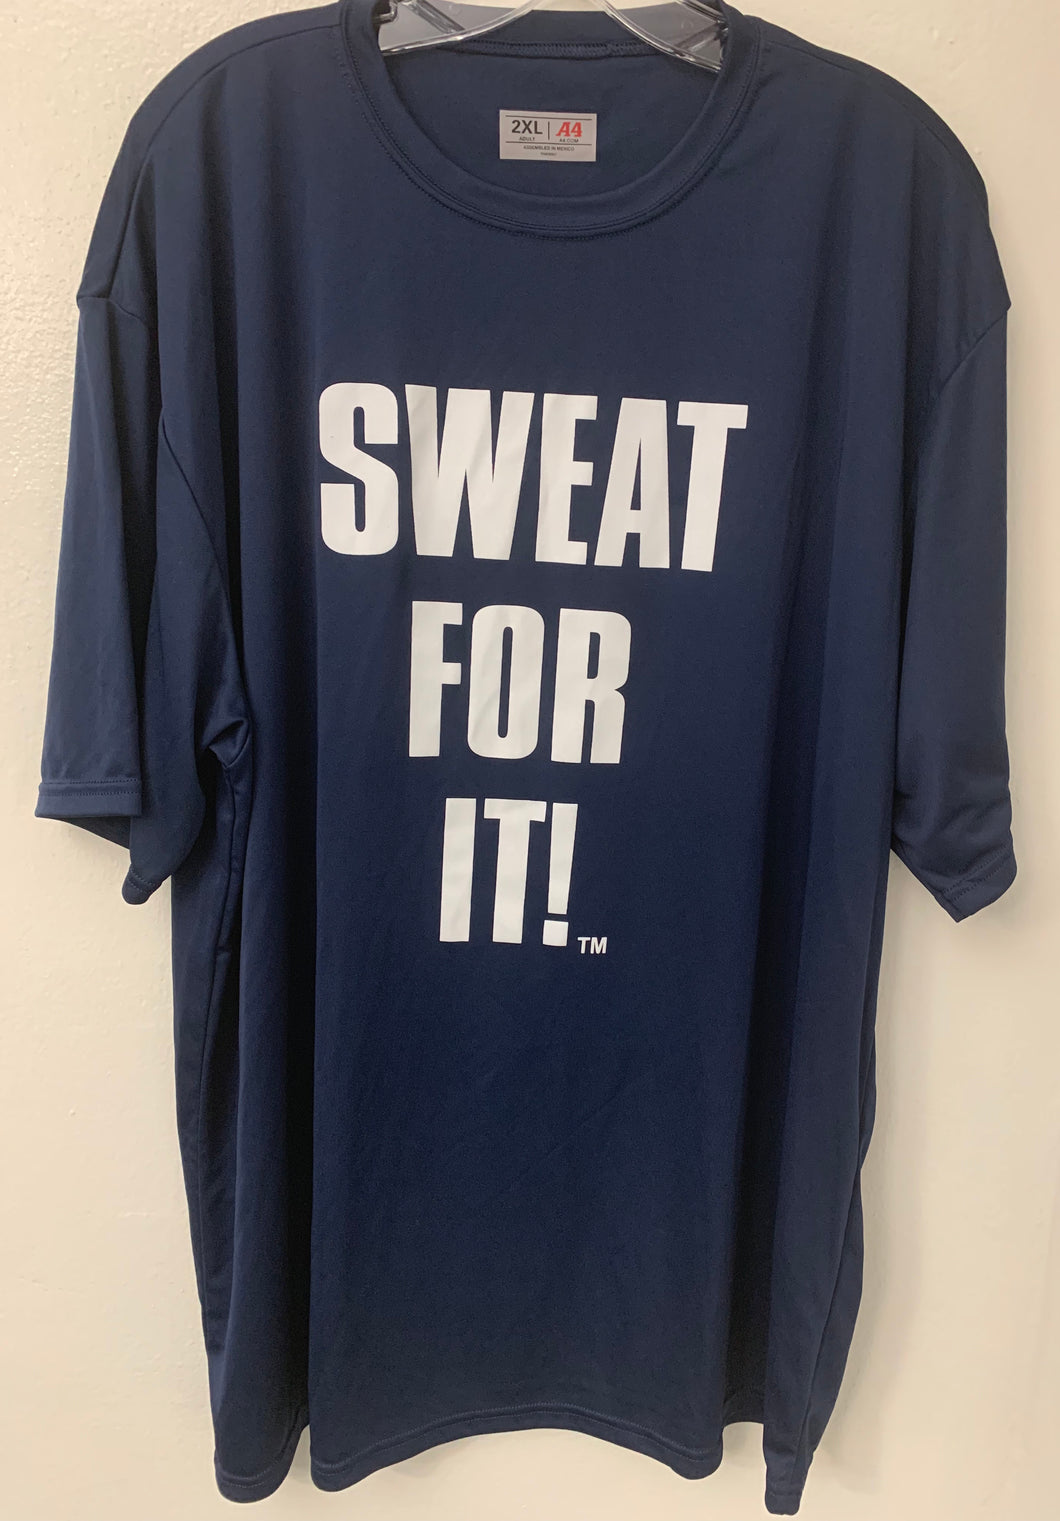 MEN’S “SWEAT FOR IT” Cooling Performance Crew Tee